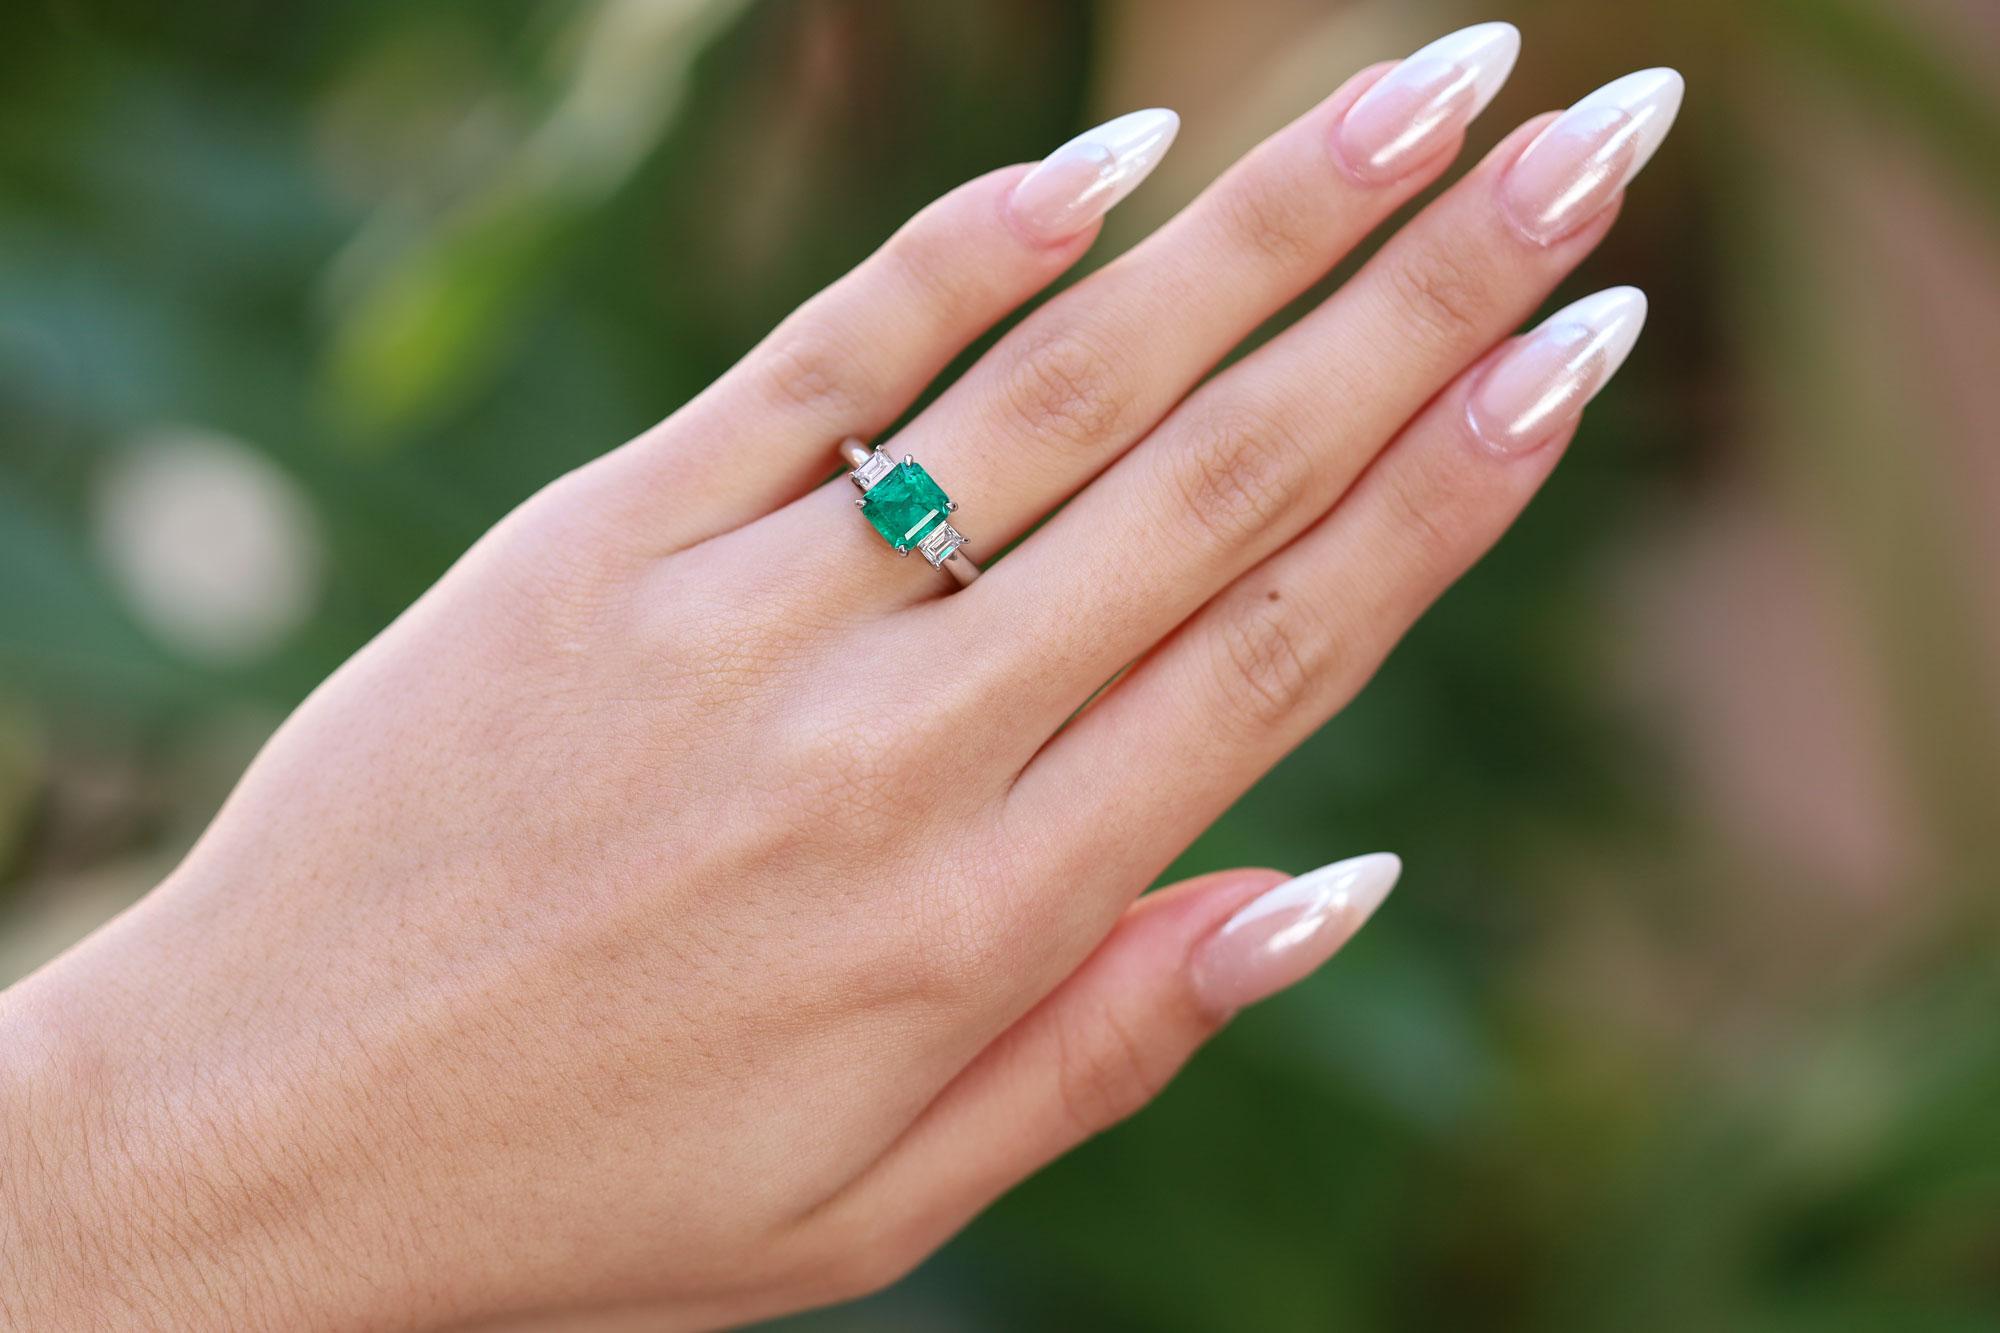 A classic gemstone engagement ring, this 1970s vintage treasure centers upon a rich, deeply saturated green Colombian emerald. GIA certified as natural with verified origin, the square, step cut gem weighs 1.69 carat and is flanked by a pair of